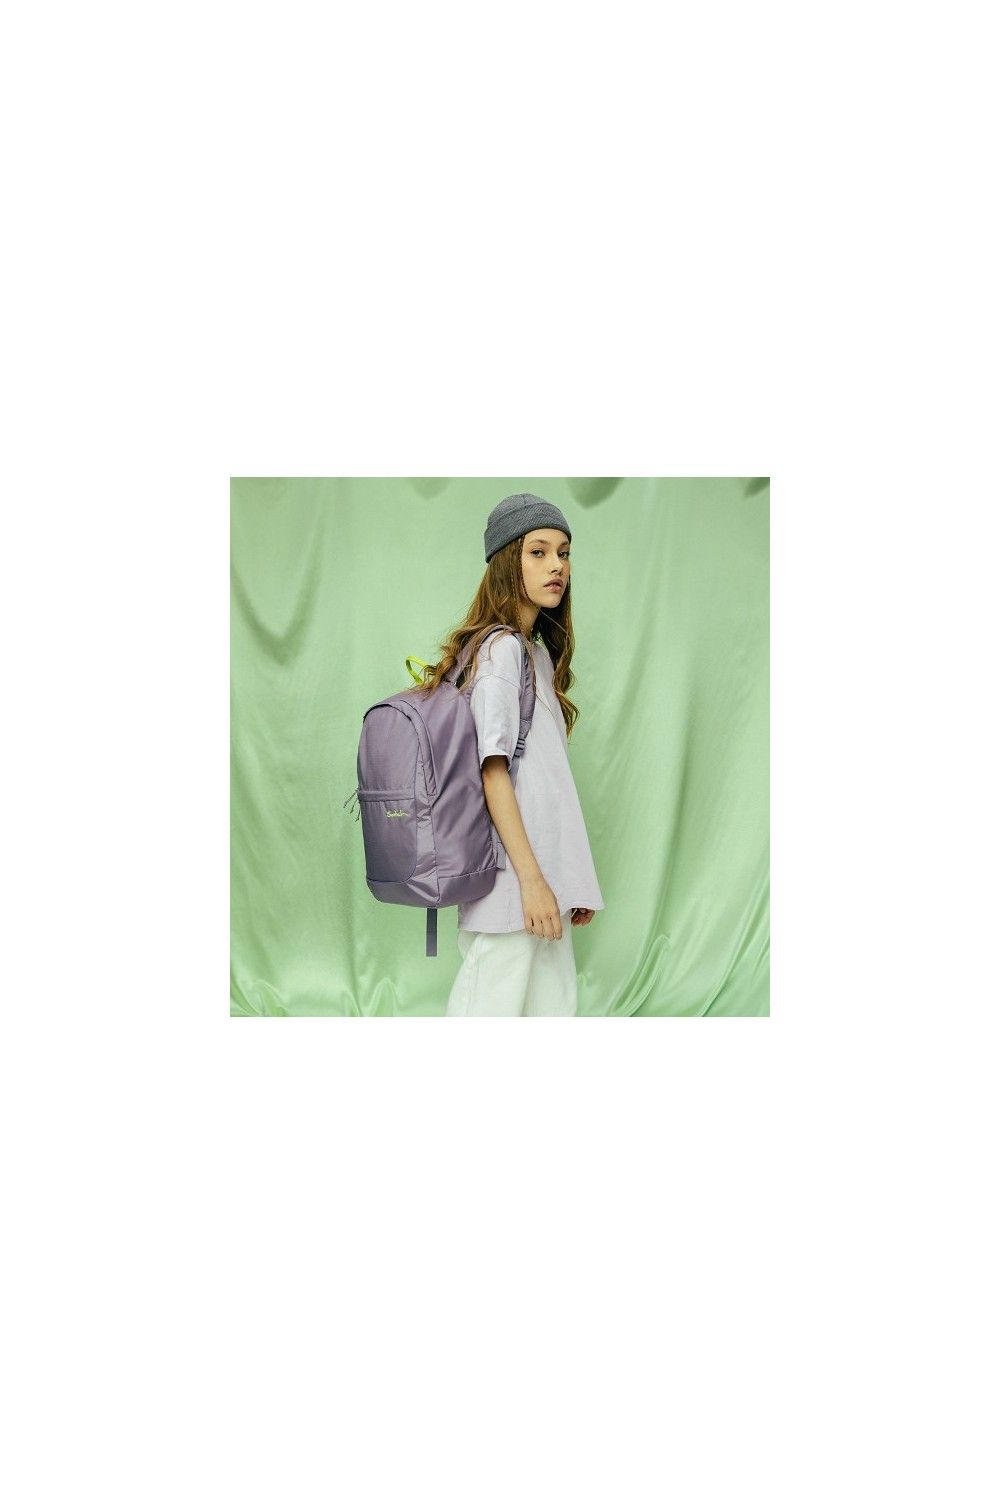 Sac à dos scolaire Satch Fly Ripstop Lilac